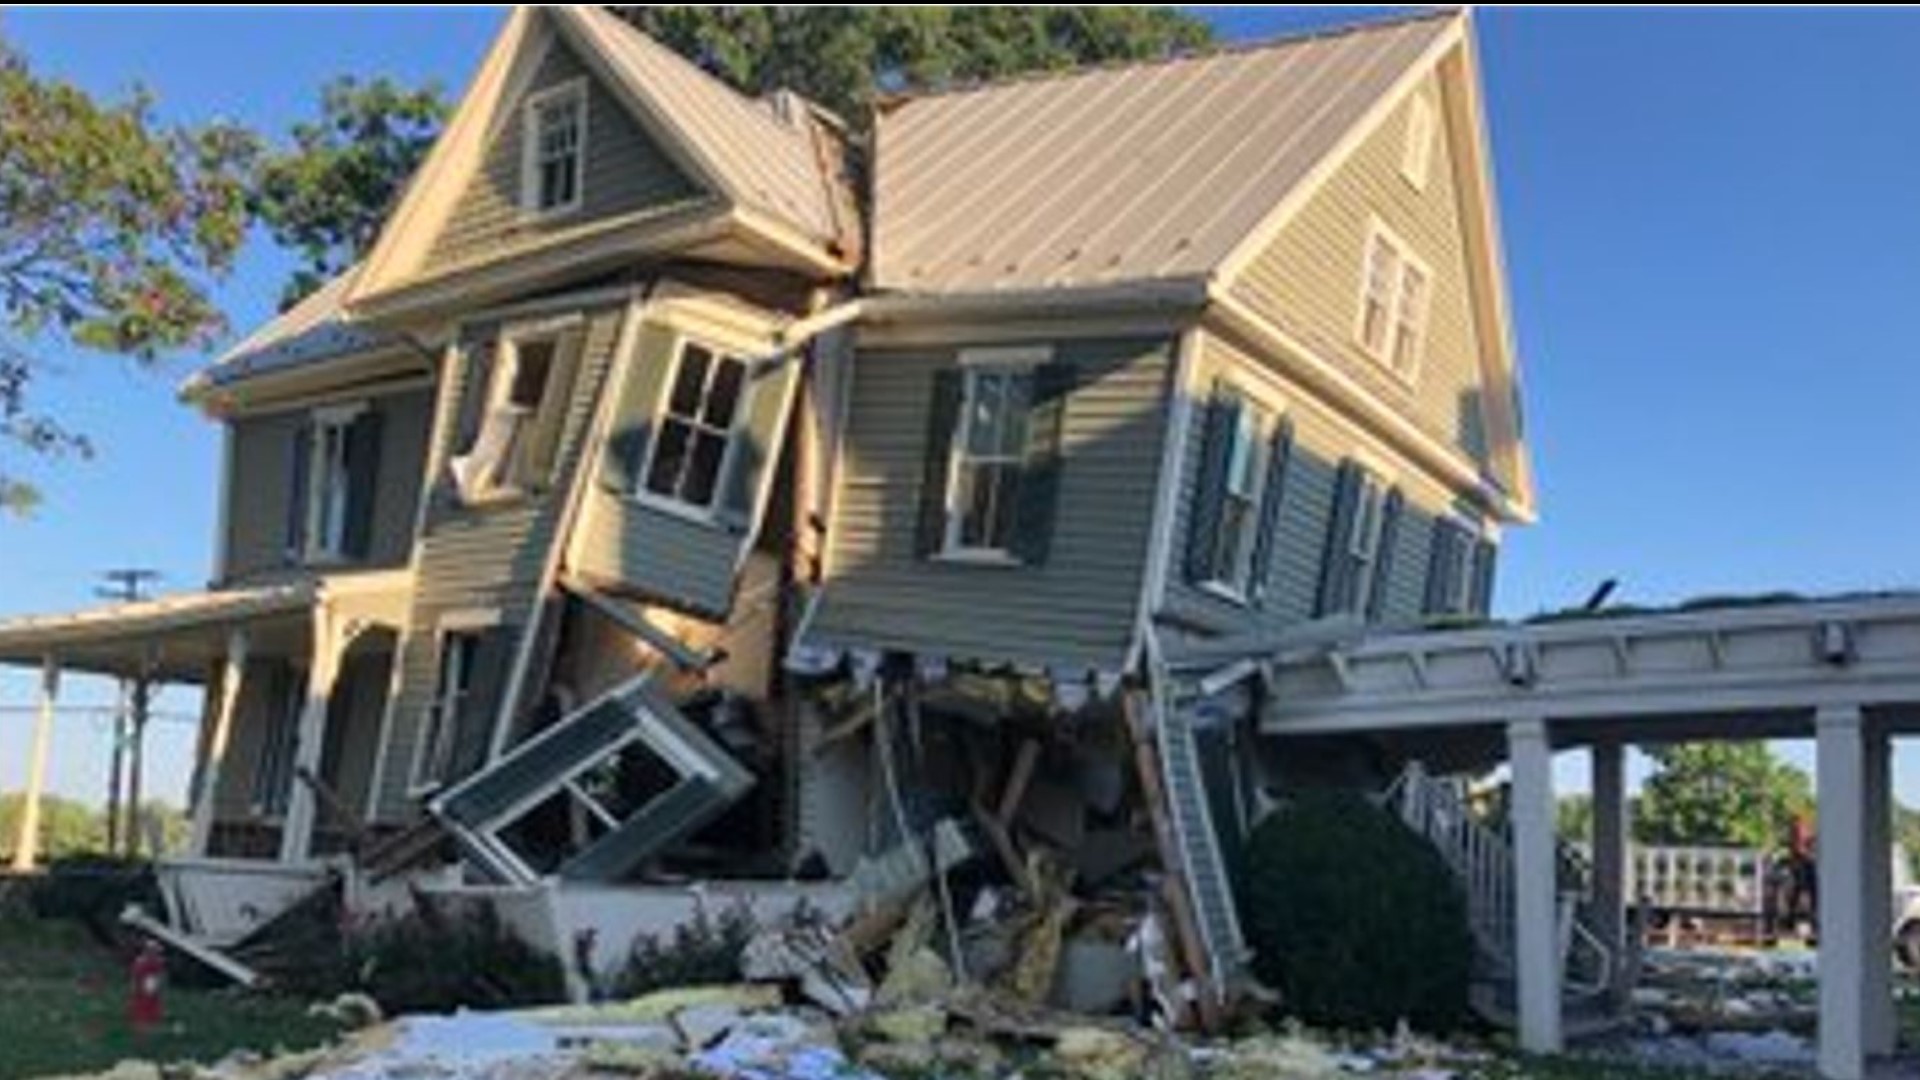 Collapse and rescue teams were at the scene of the collapsed home working to stabilize the structure, officials say.